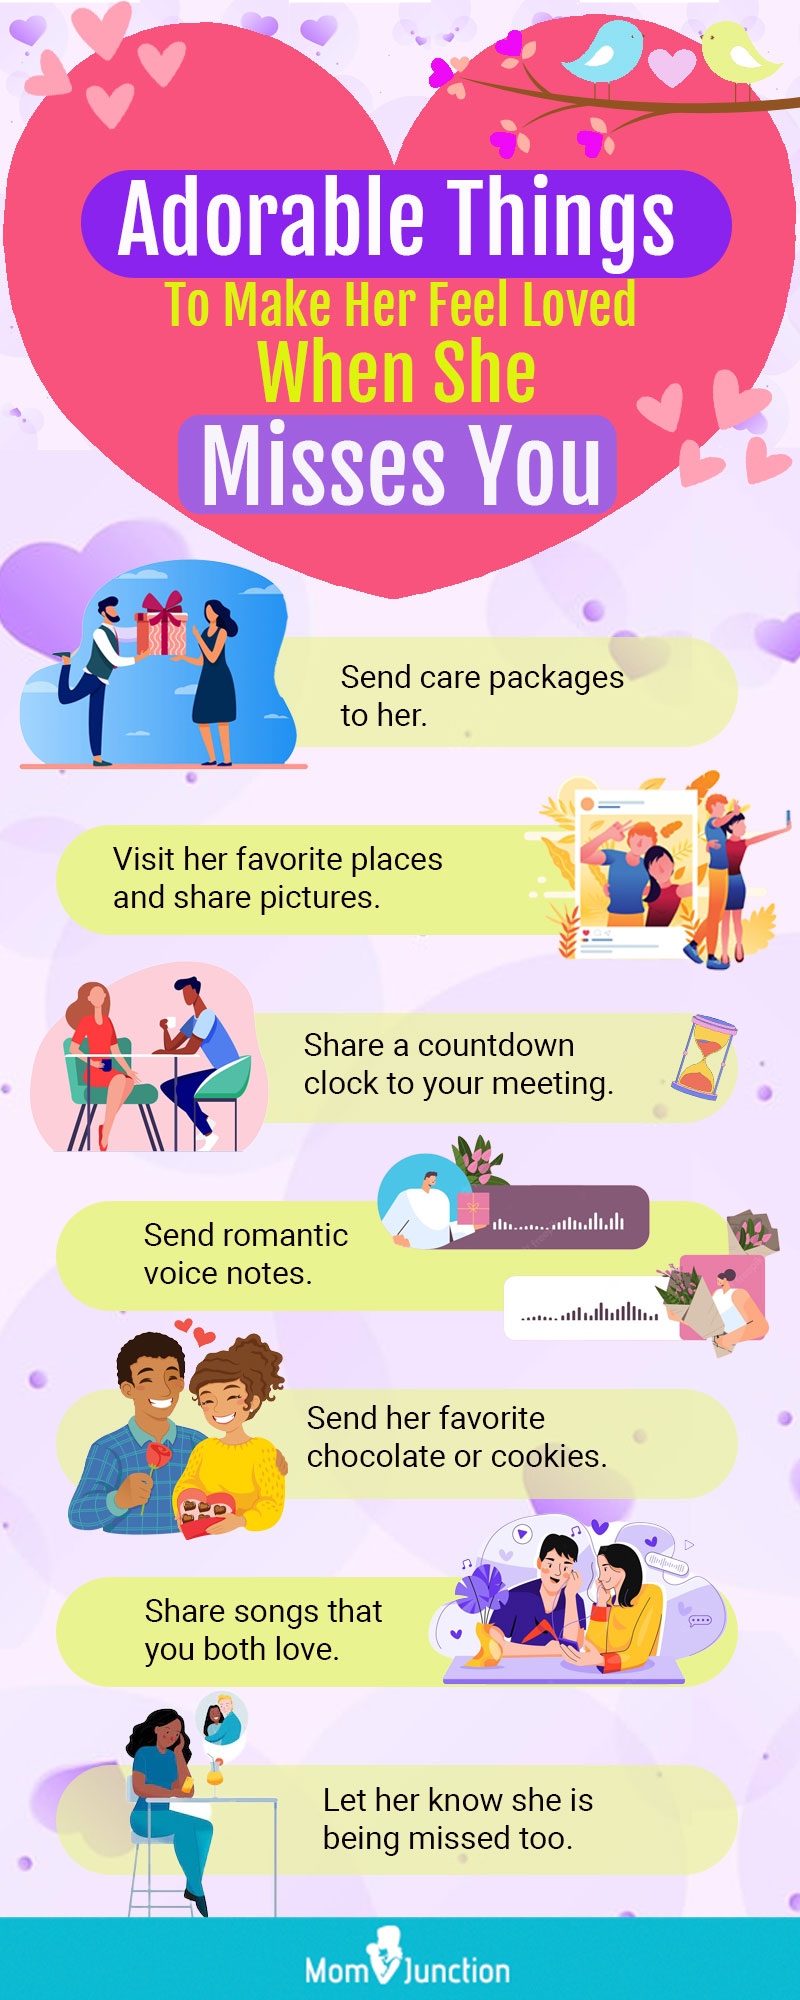 tips to make her miss you [infographic]